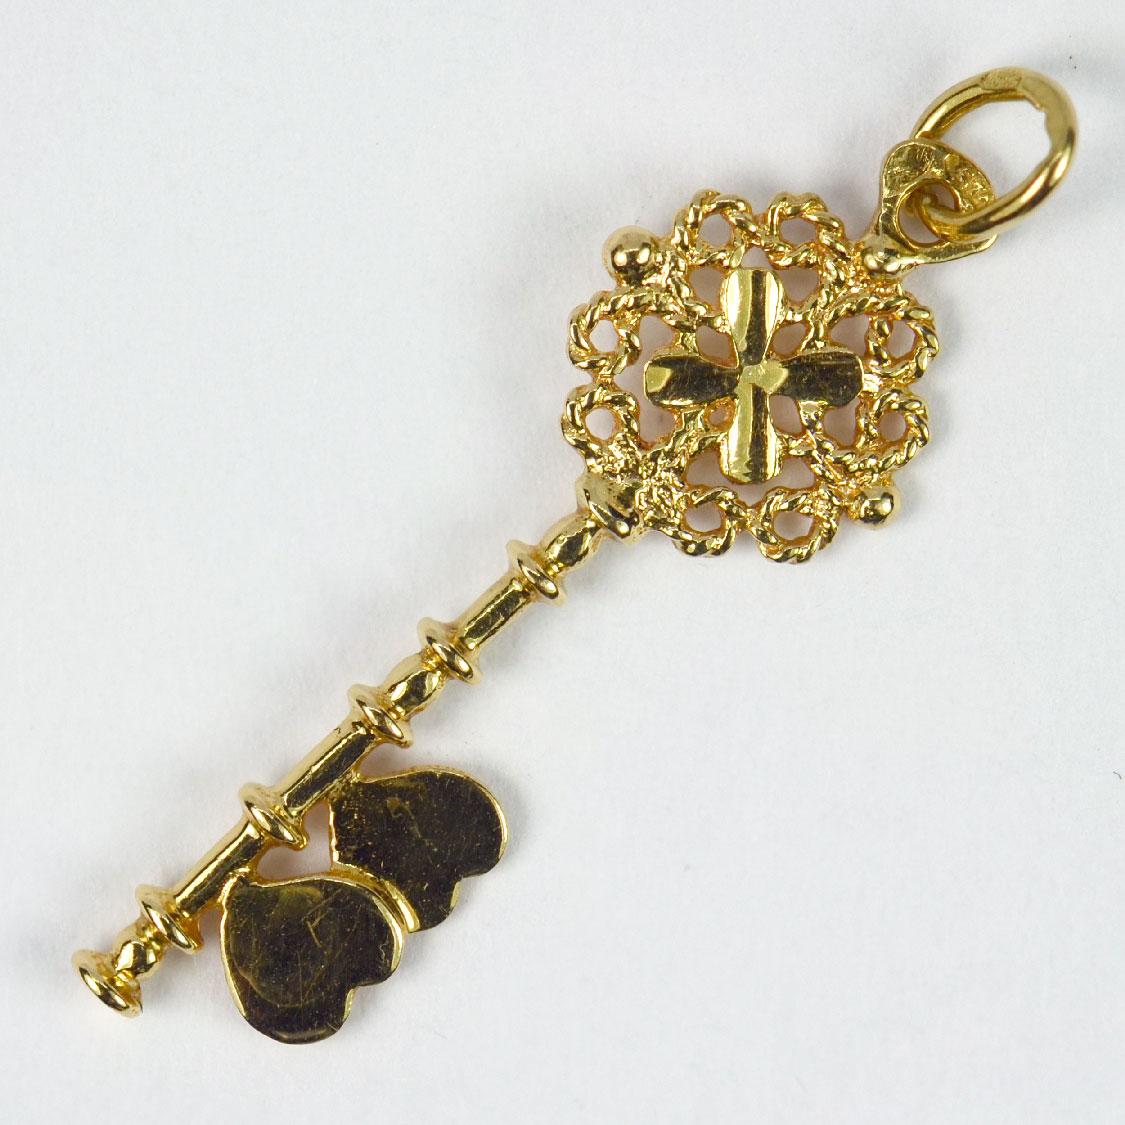 18K Yellow Gold Love Heart Key Charm Pendant In Good Condition For Sale In London, GB